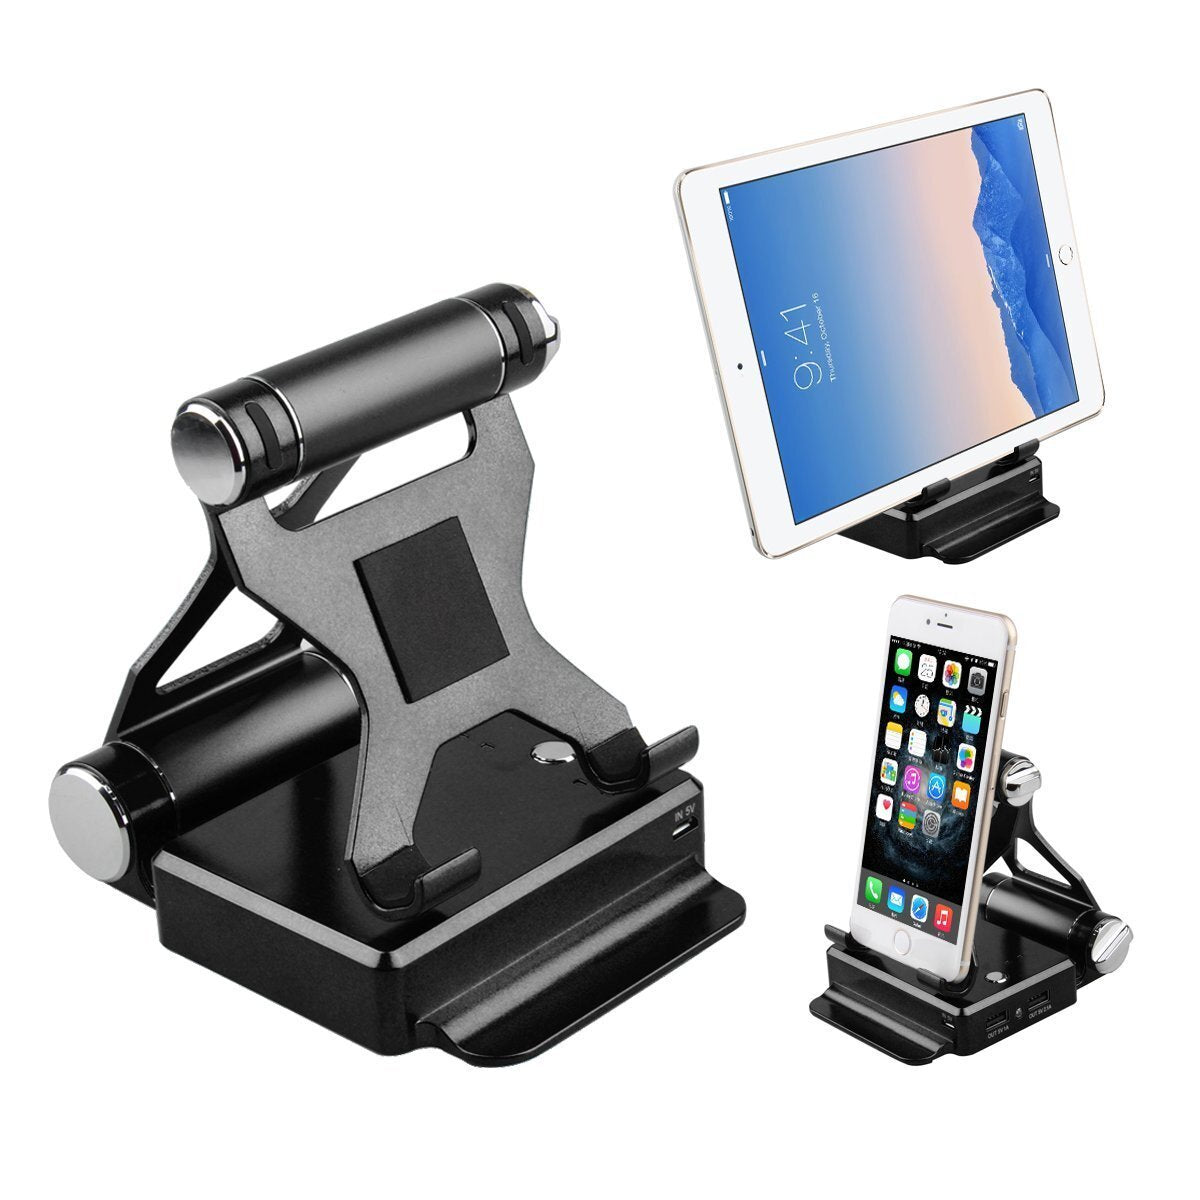 Color: Black - Podium Style Stand With Extended Battery Up To 200% For iPad, iPhone And Other Smart Gadgets